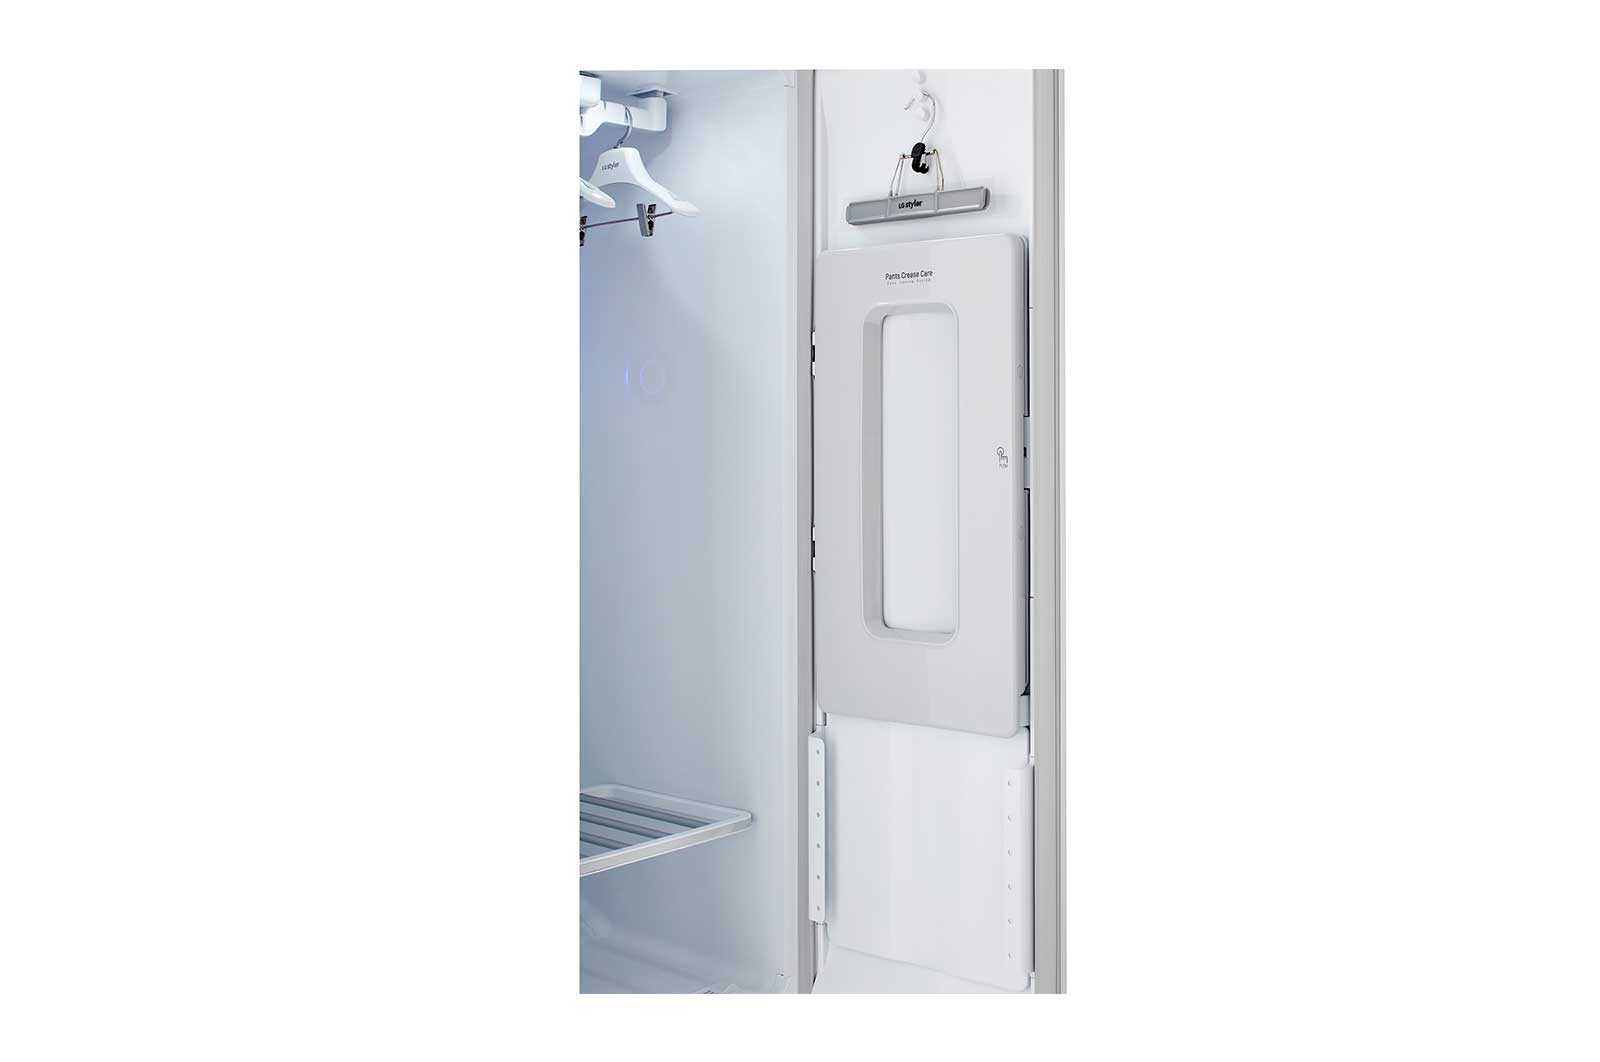 LG Styler® Smart wi-fi Enabled Steam Closet with TrueSteam® Technology and Exclusive Moving Hangers